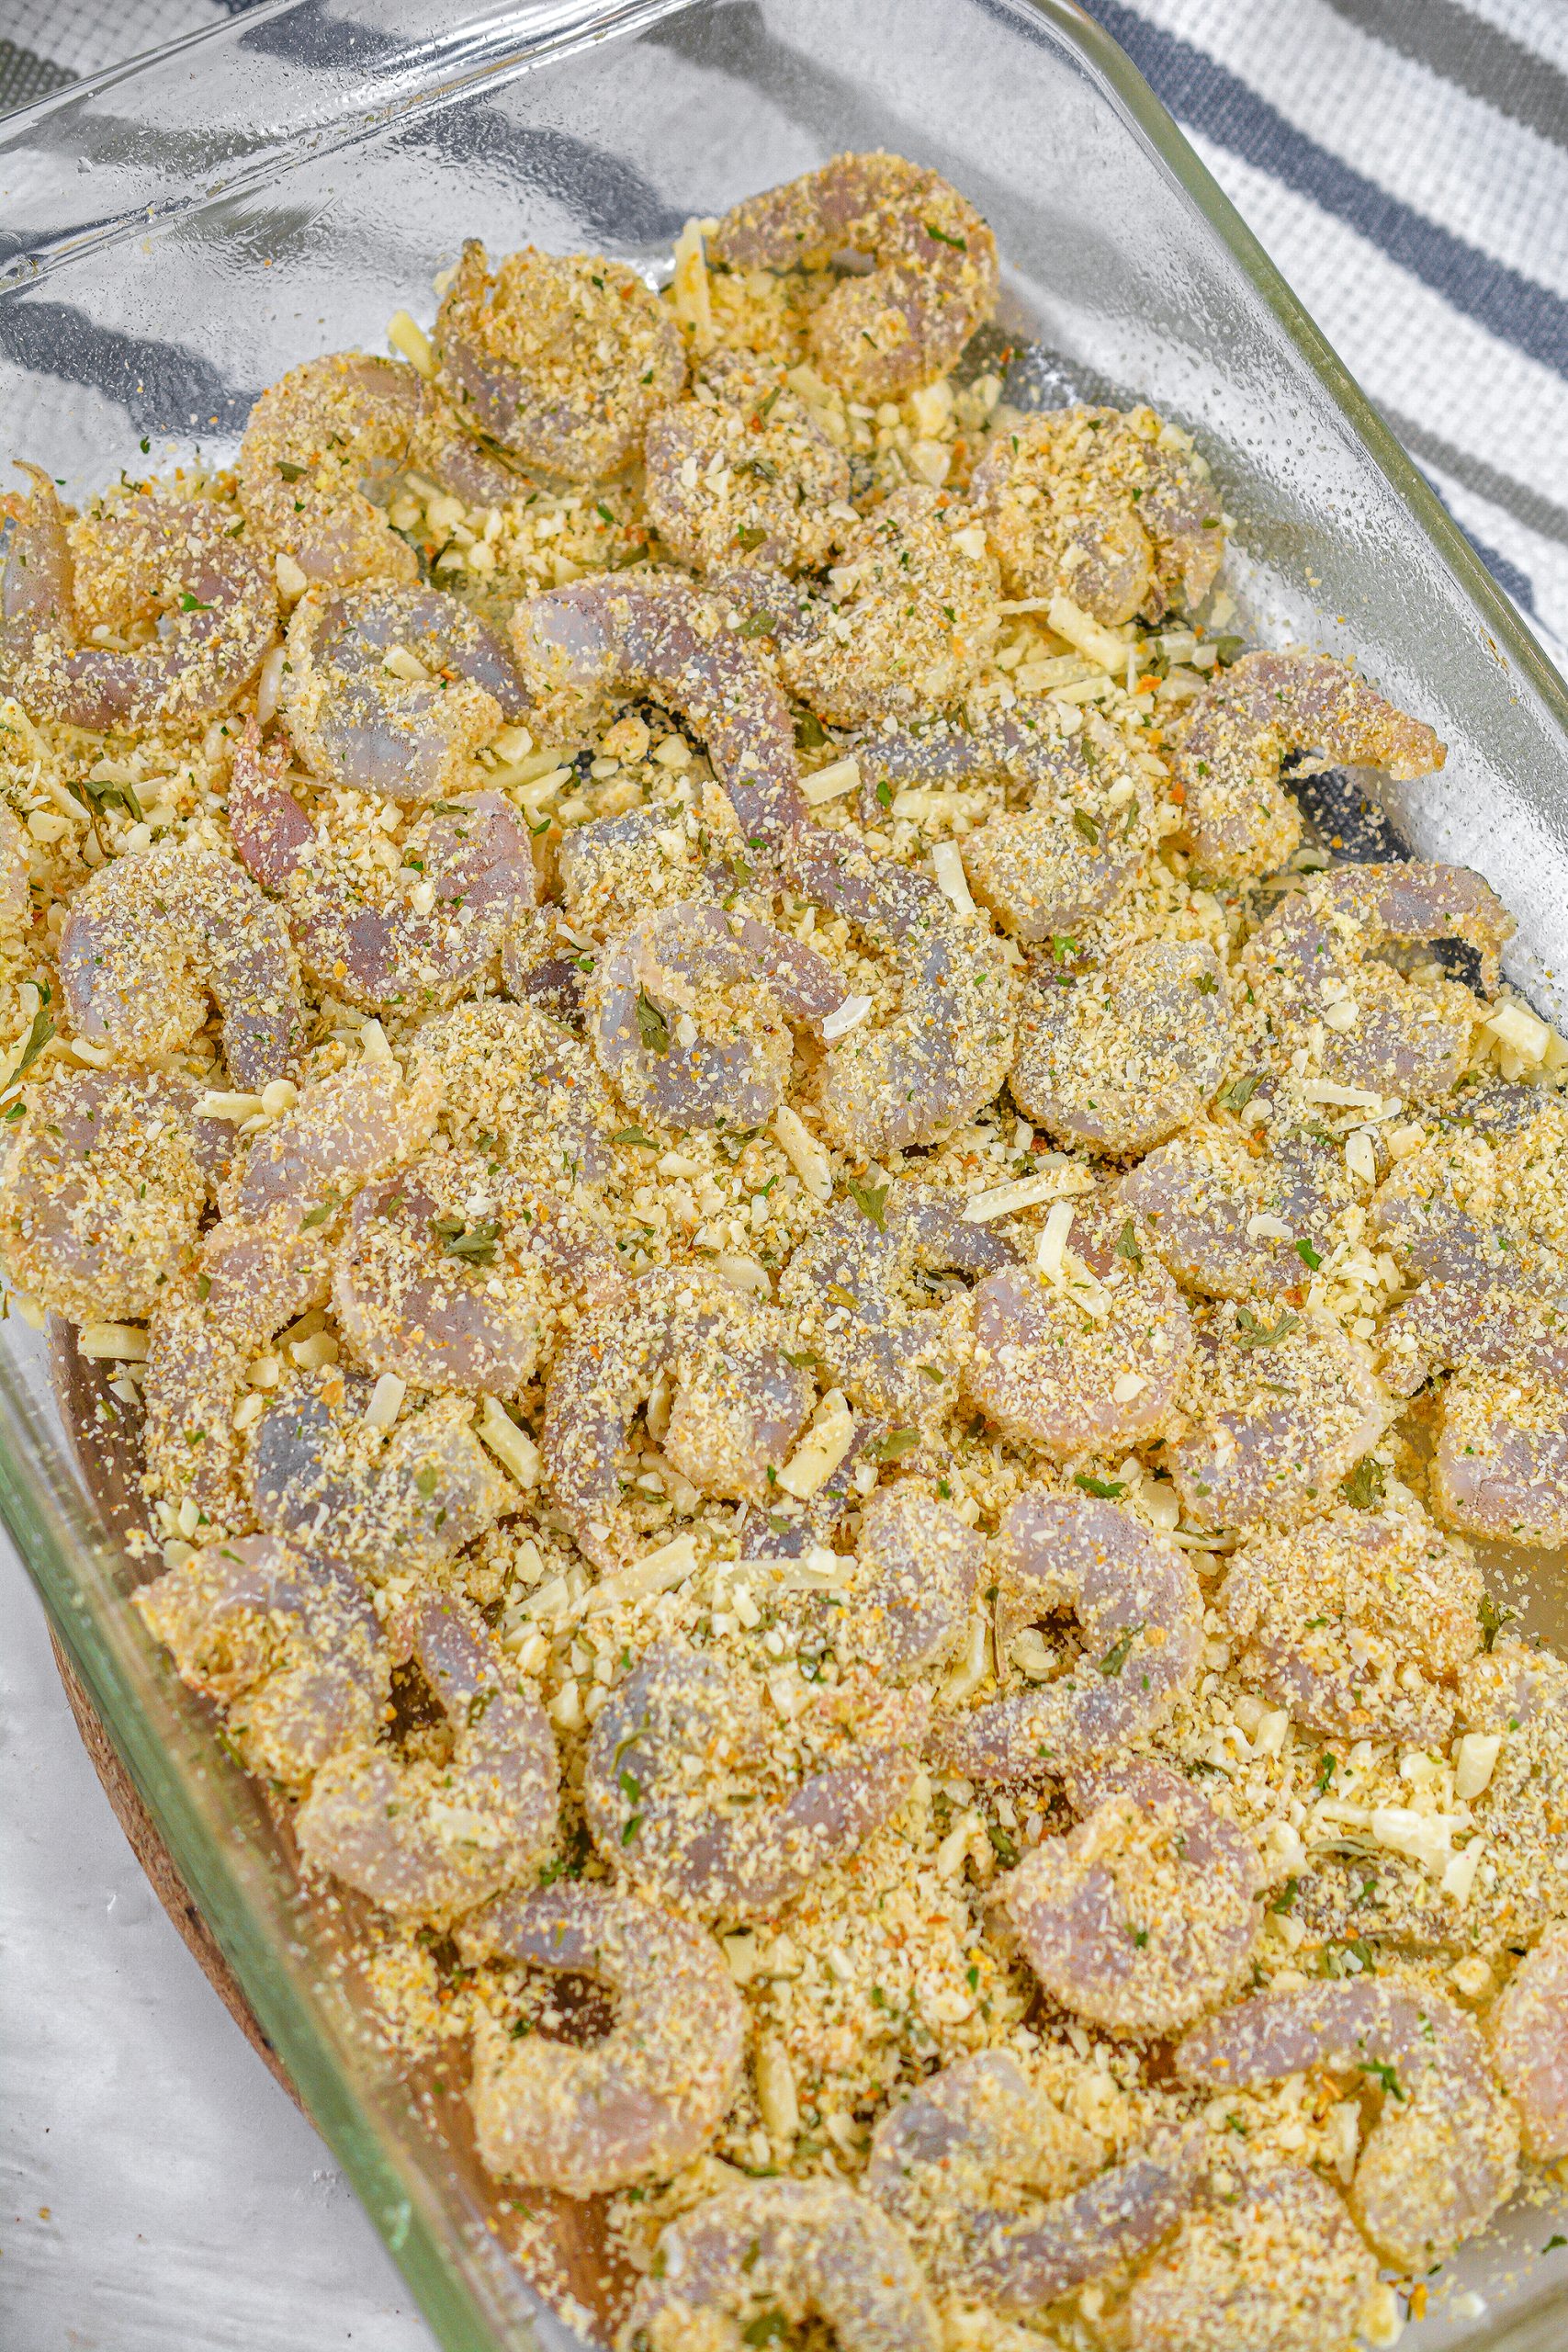 Layer the coated shrimp in a well greased 9x13 casserole dish.